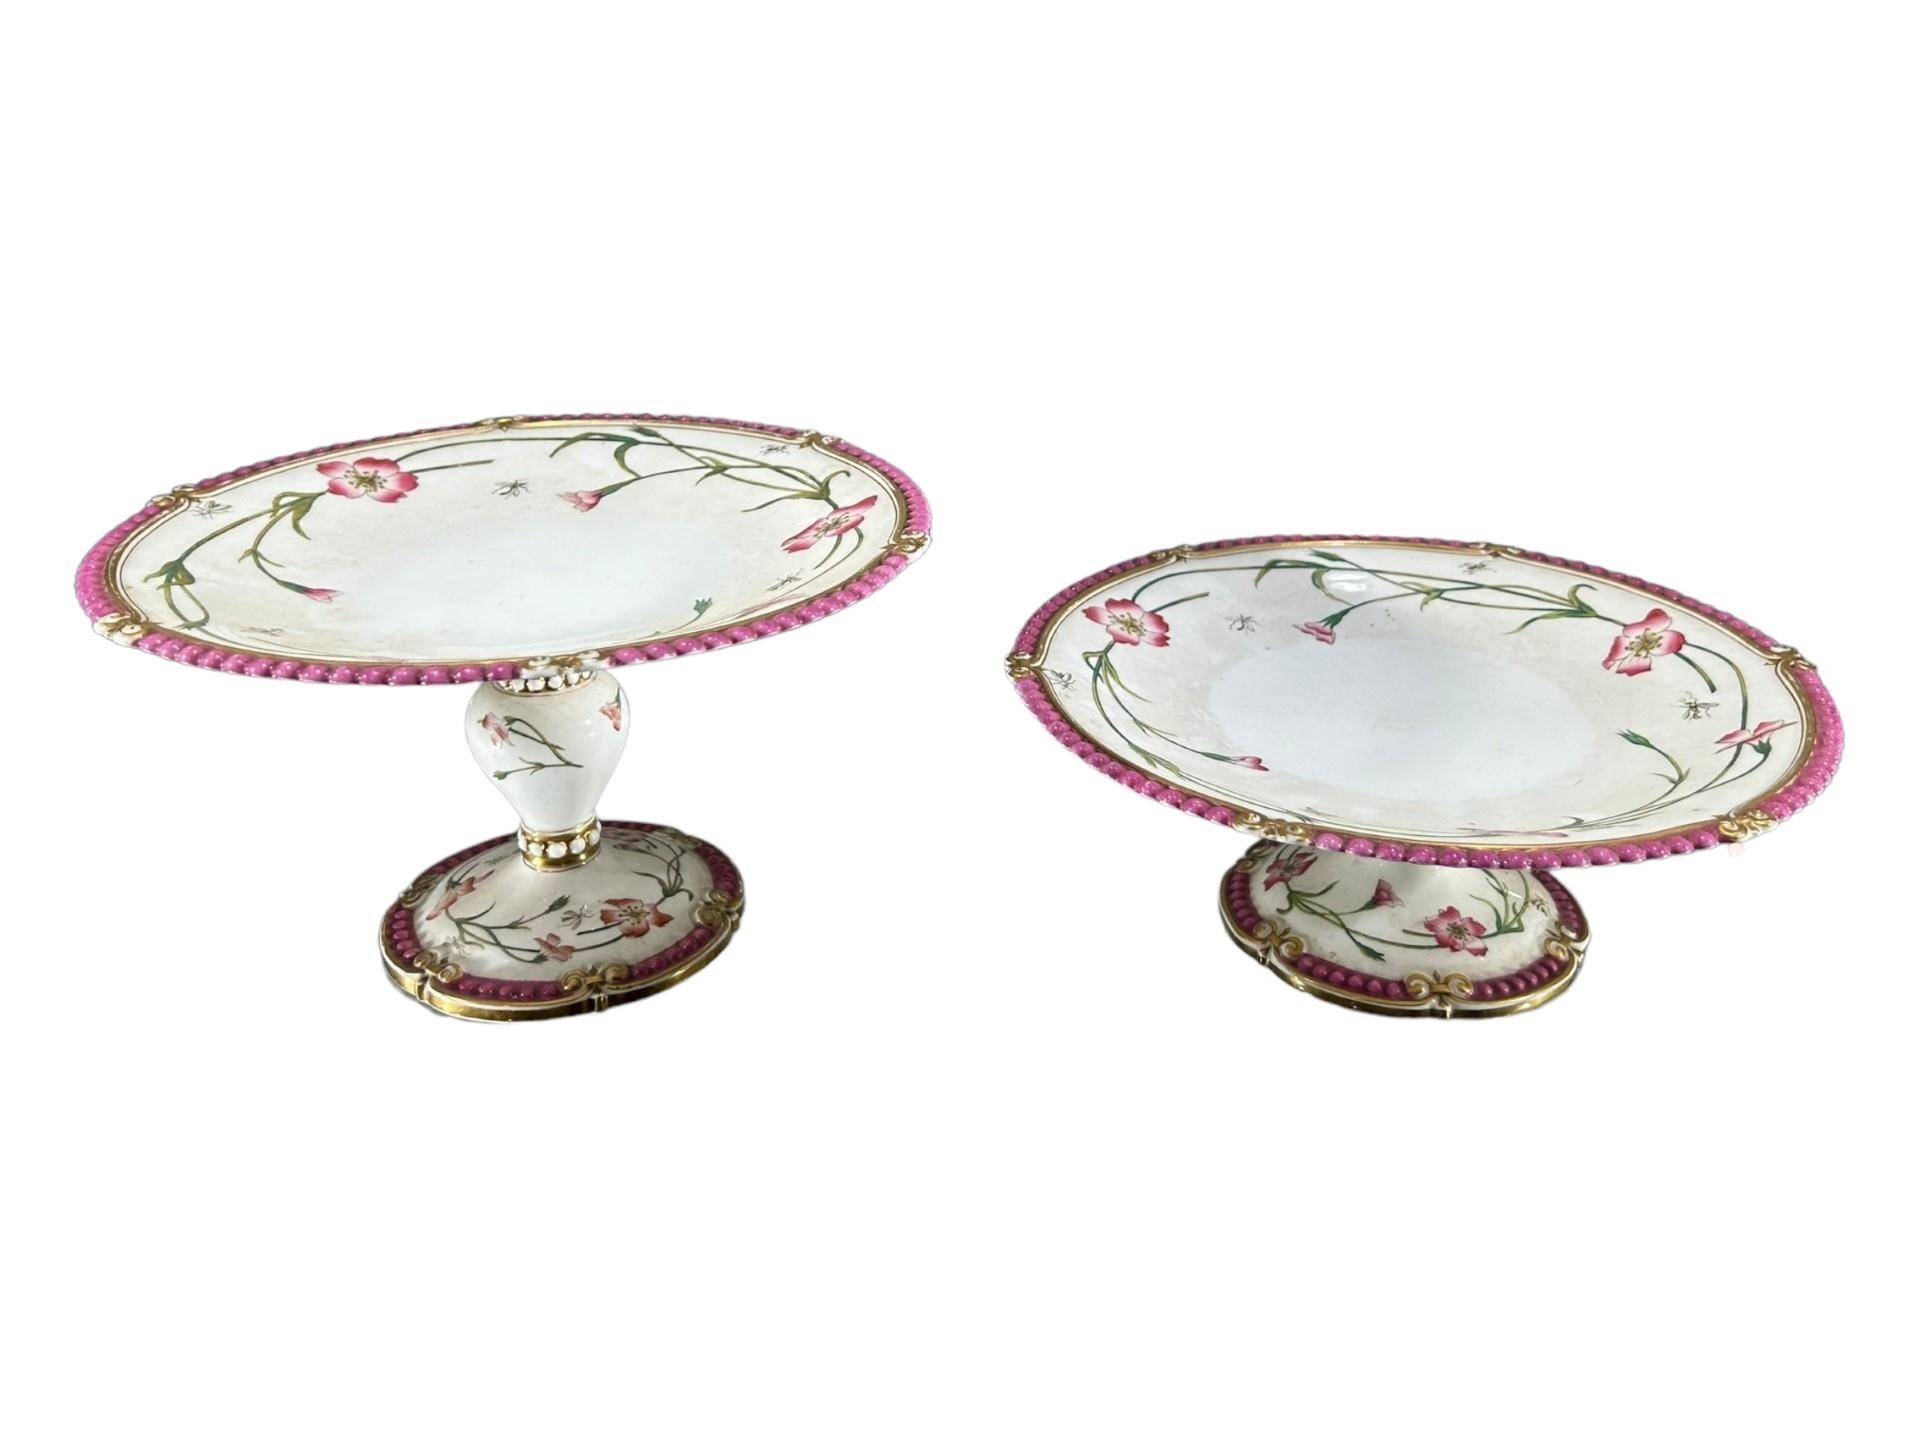 T.C. BROWN-WESTHEAD MOORE & CO., A 19TH CENTURY VICTORIAN PORCELAIN DESSERT TAZZAS AND PLATES - Image 2 of 5